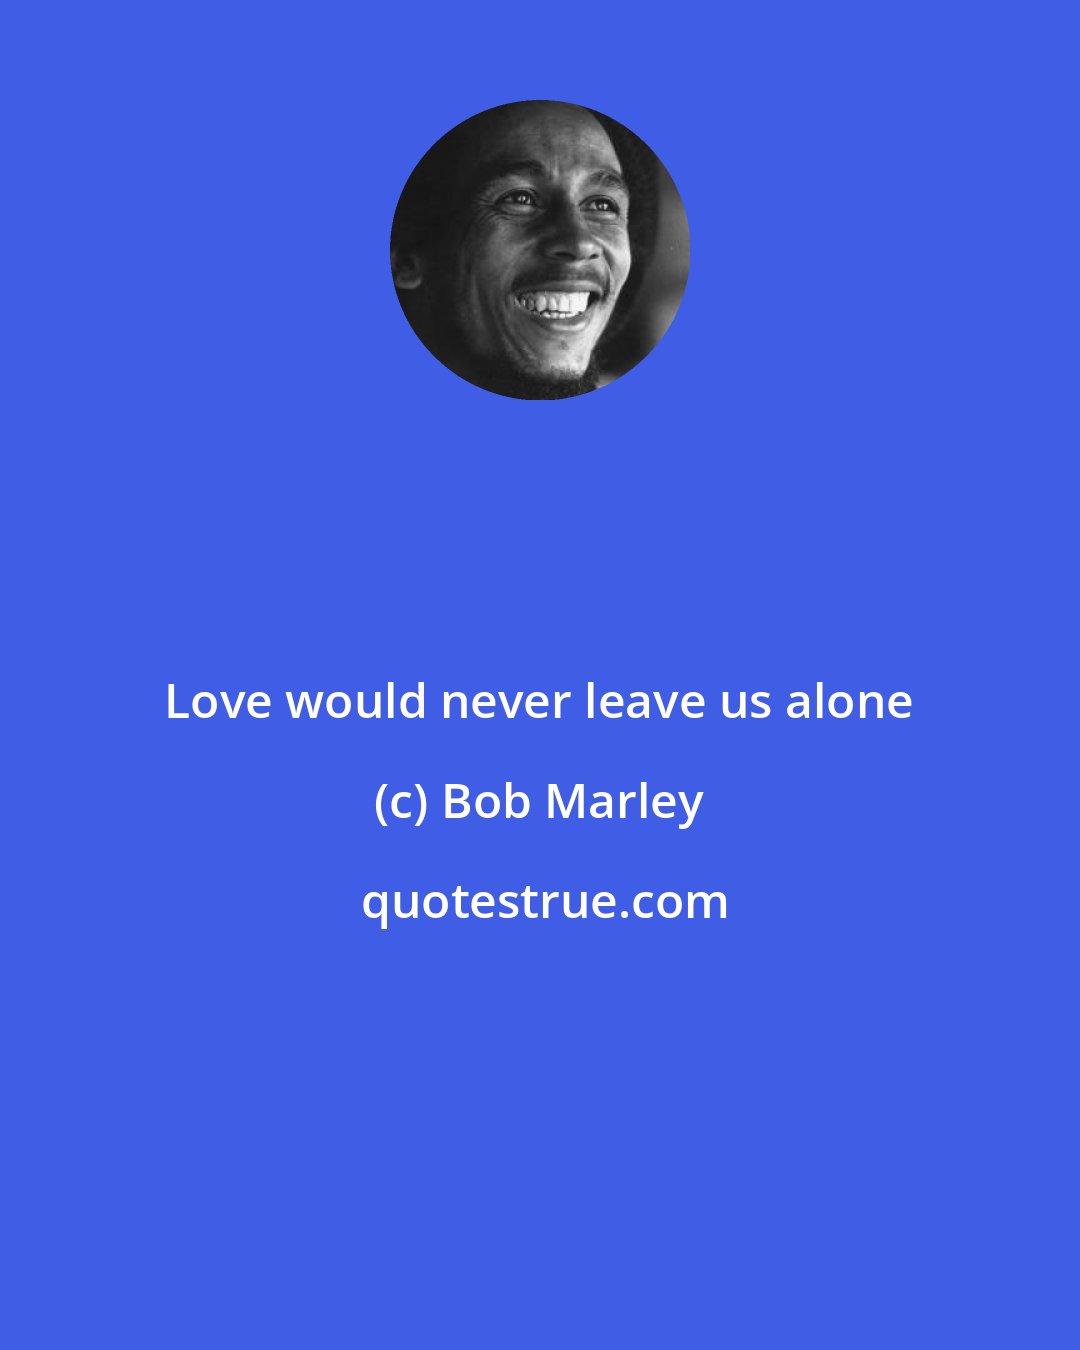 Bob Marley: Love would never leave us alone